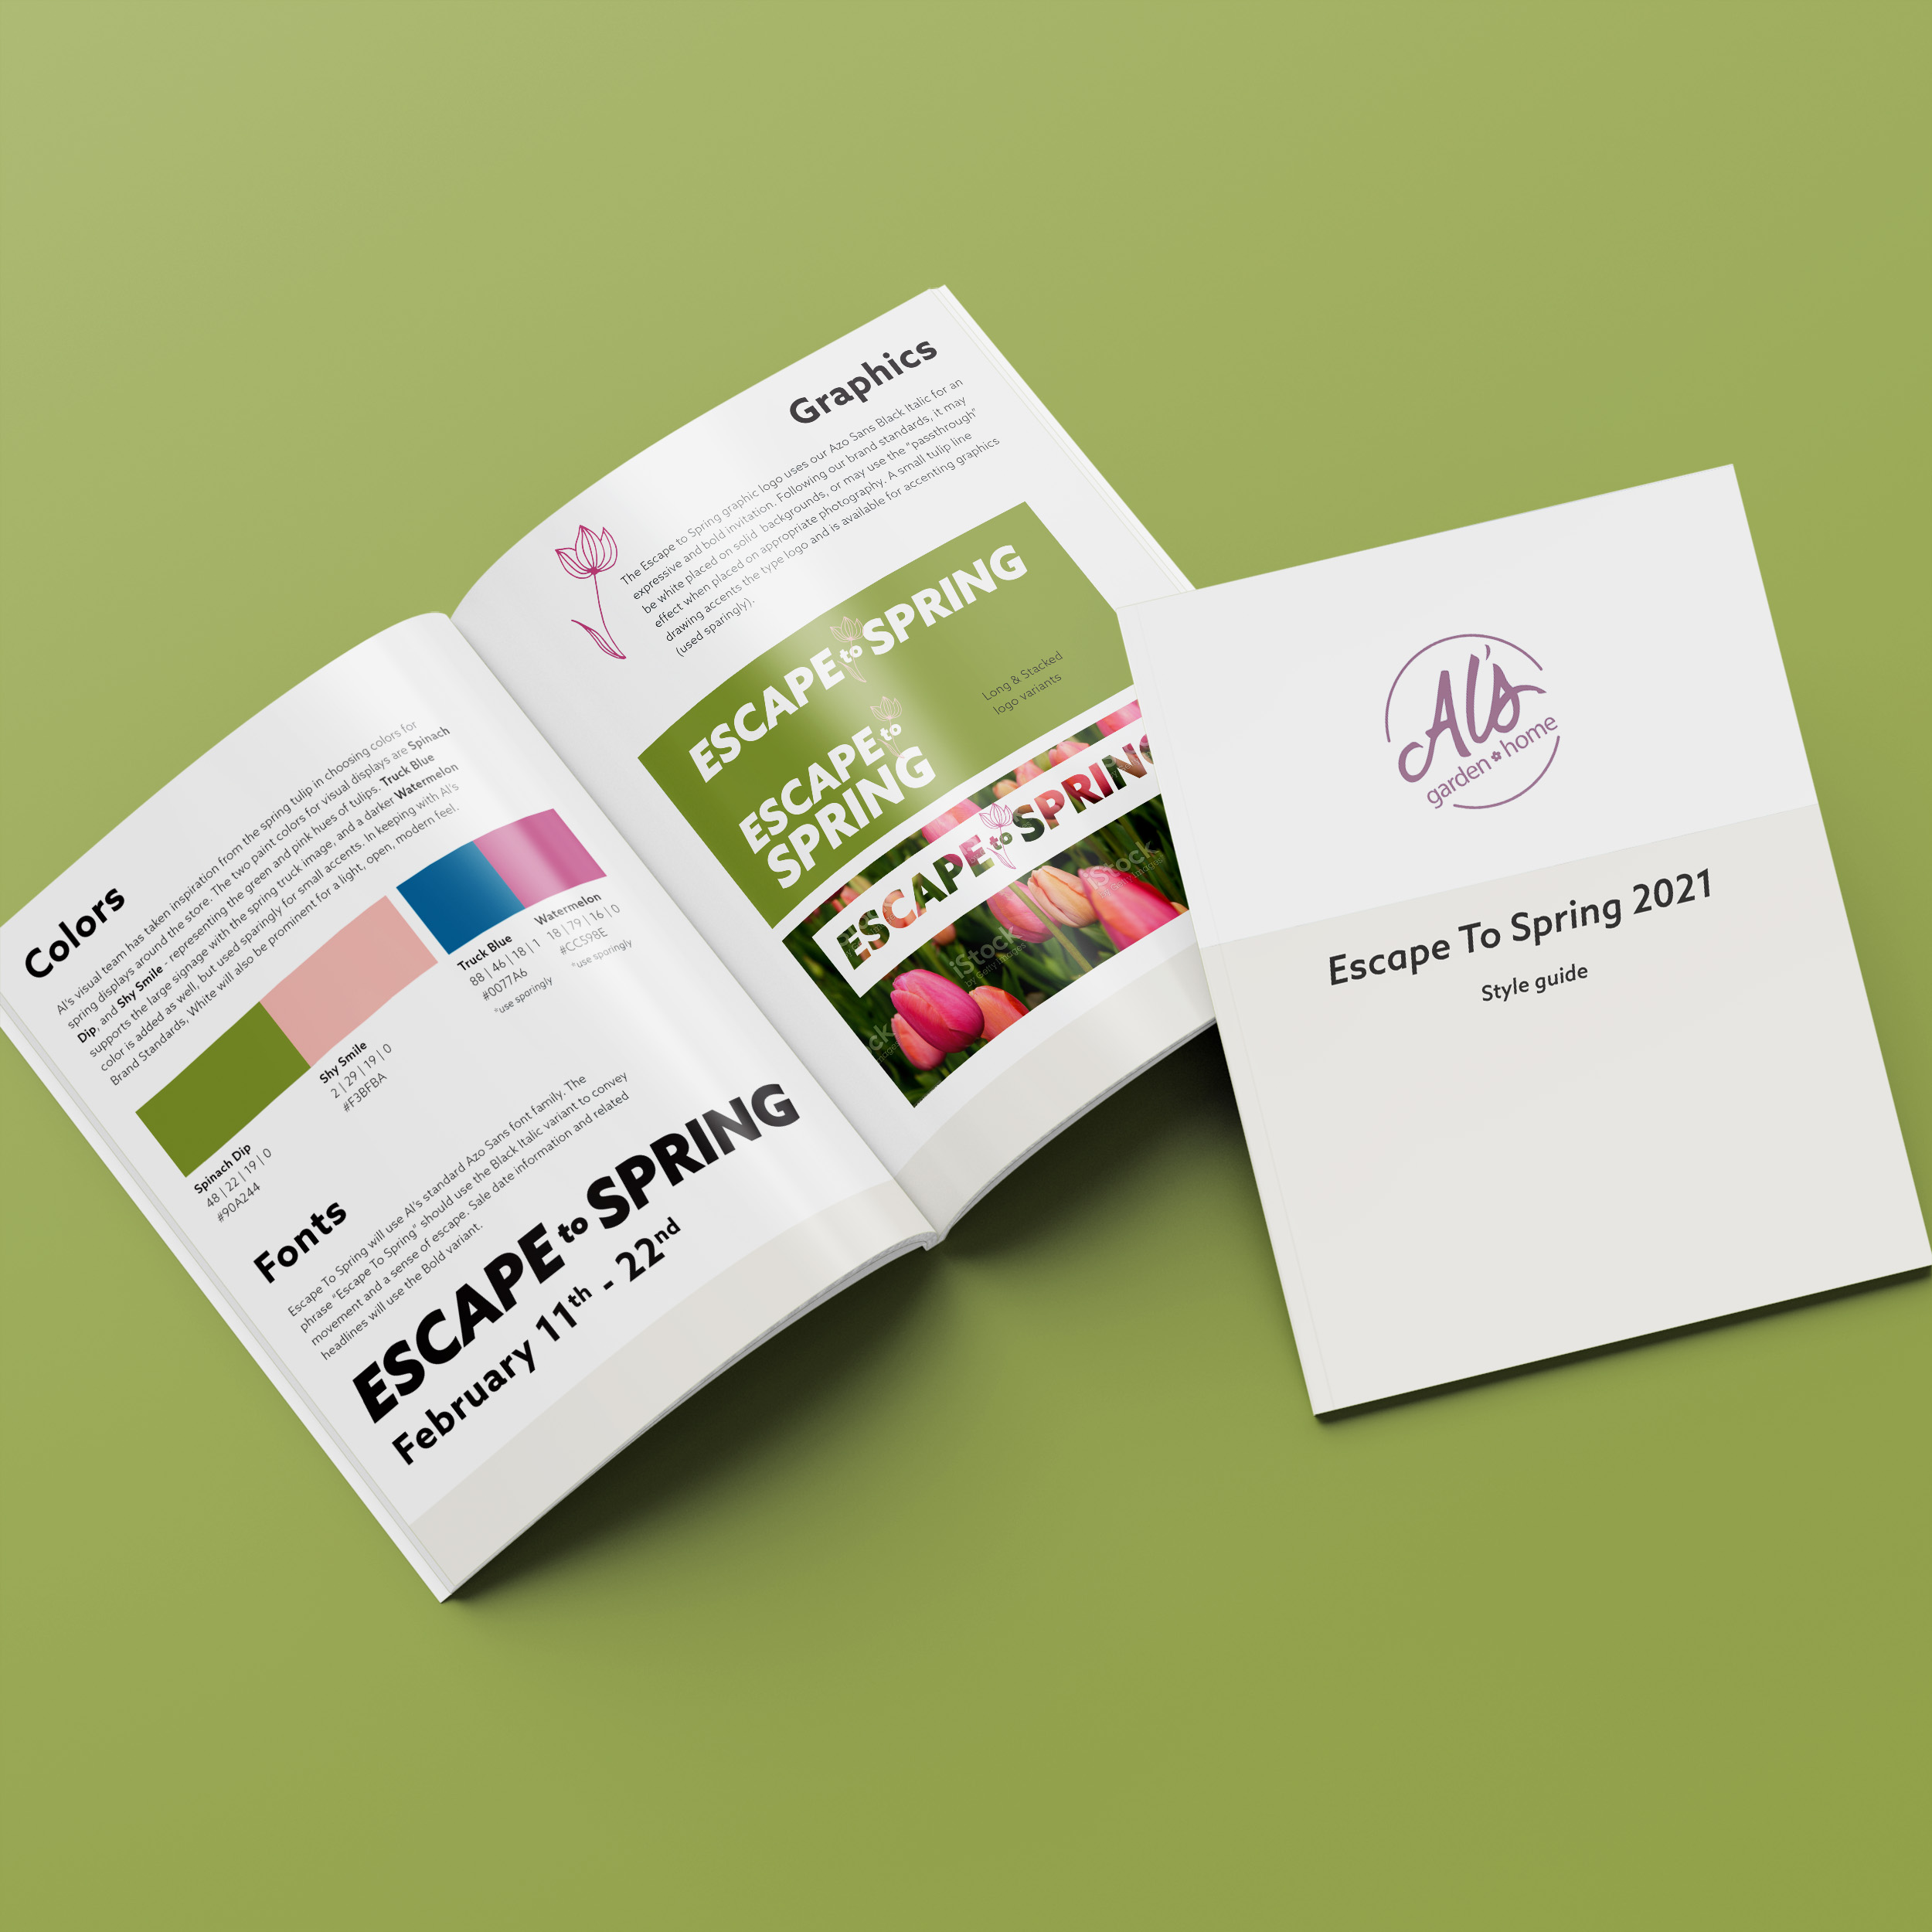 Escape To Spring Styleguide mockup